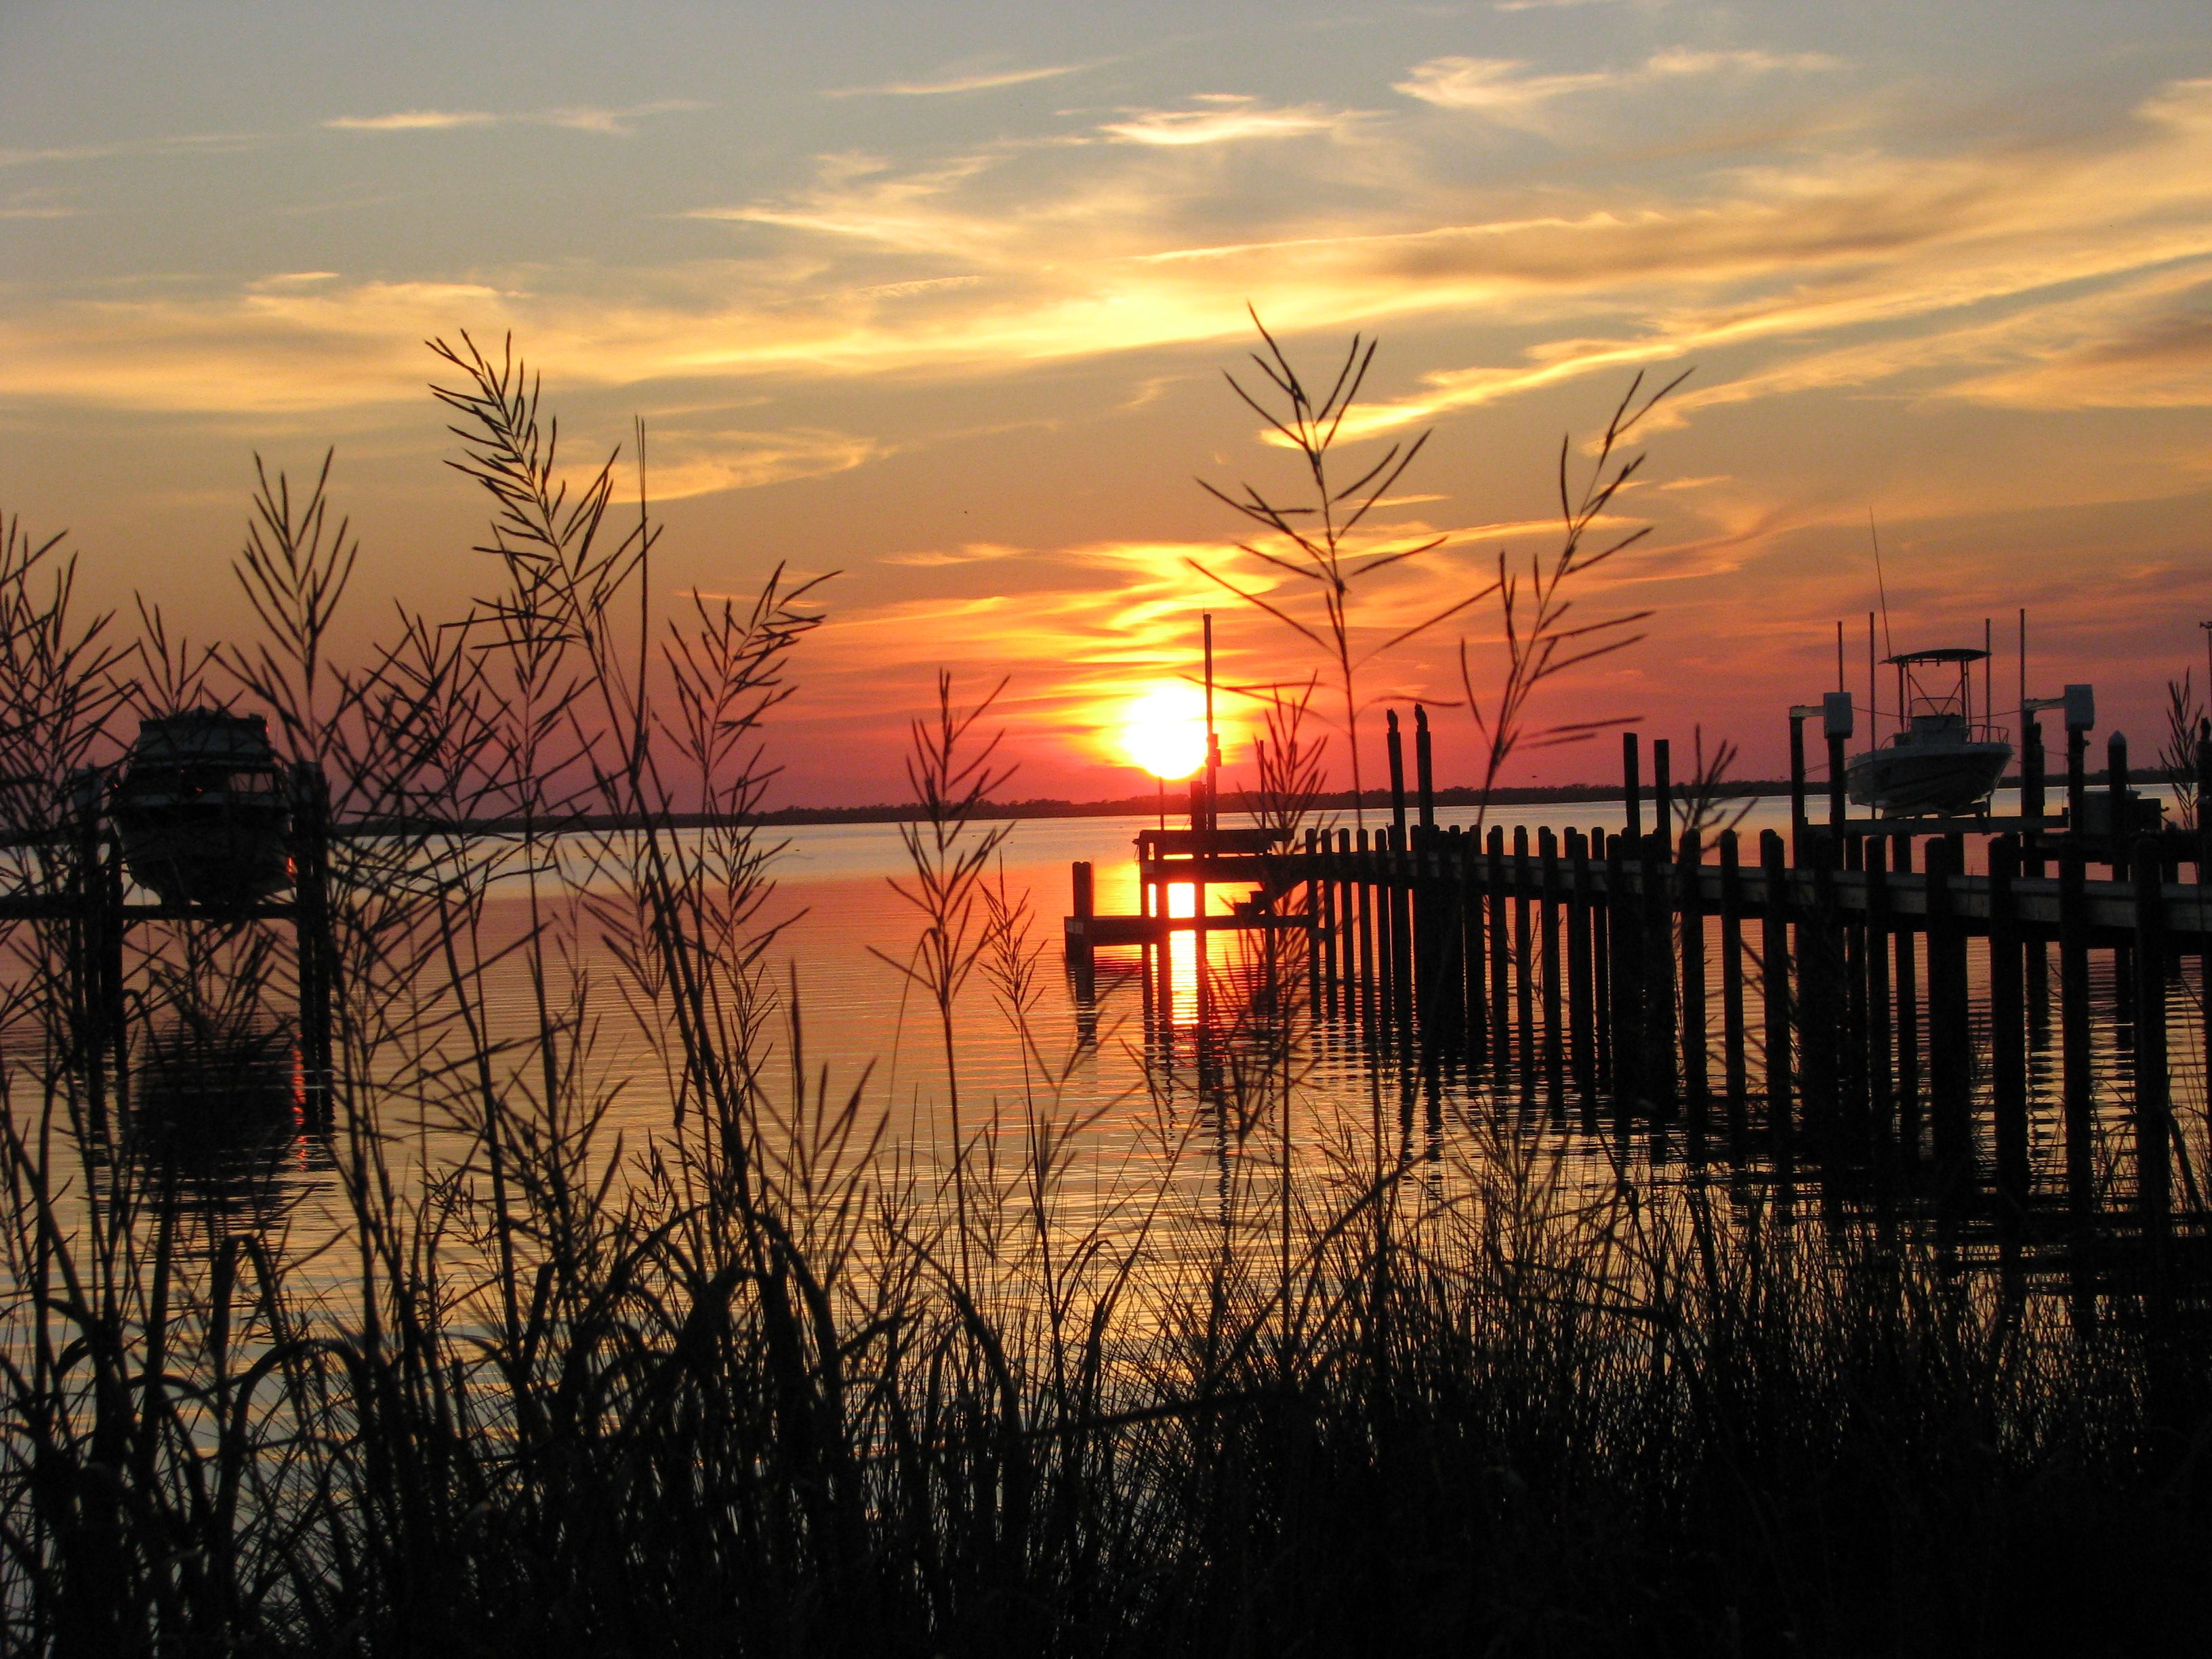 Sunset on the sound. #OuterBanks #OBX | Beautiful scenery's ...